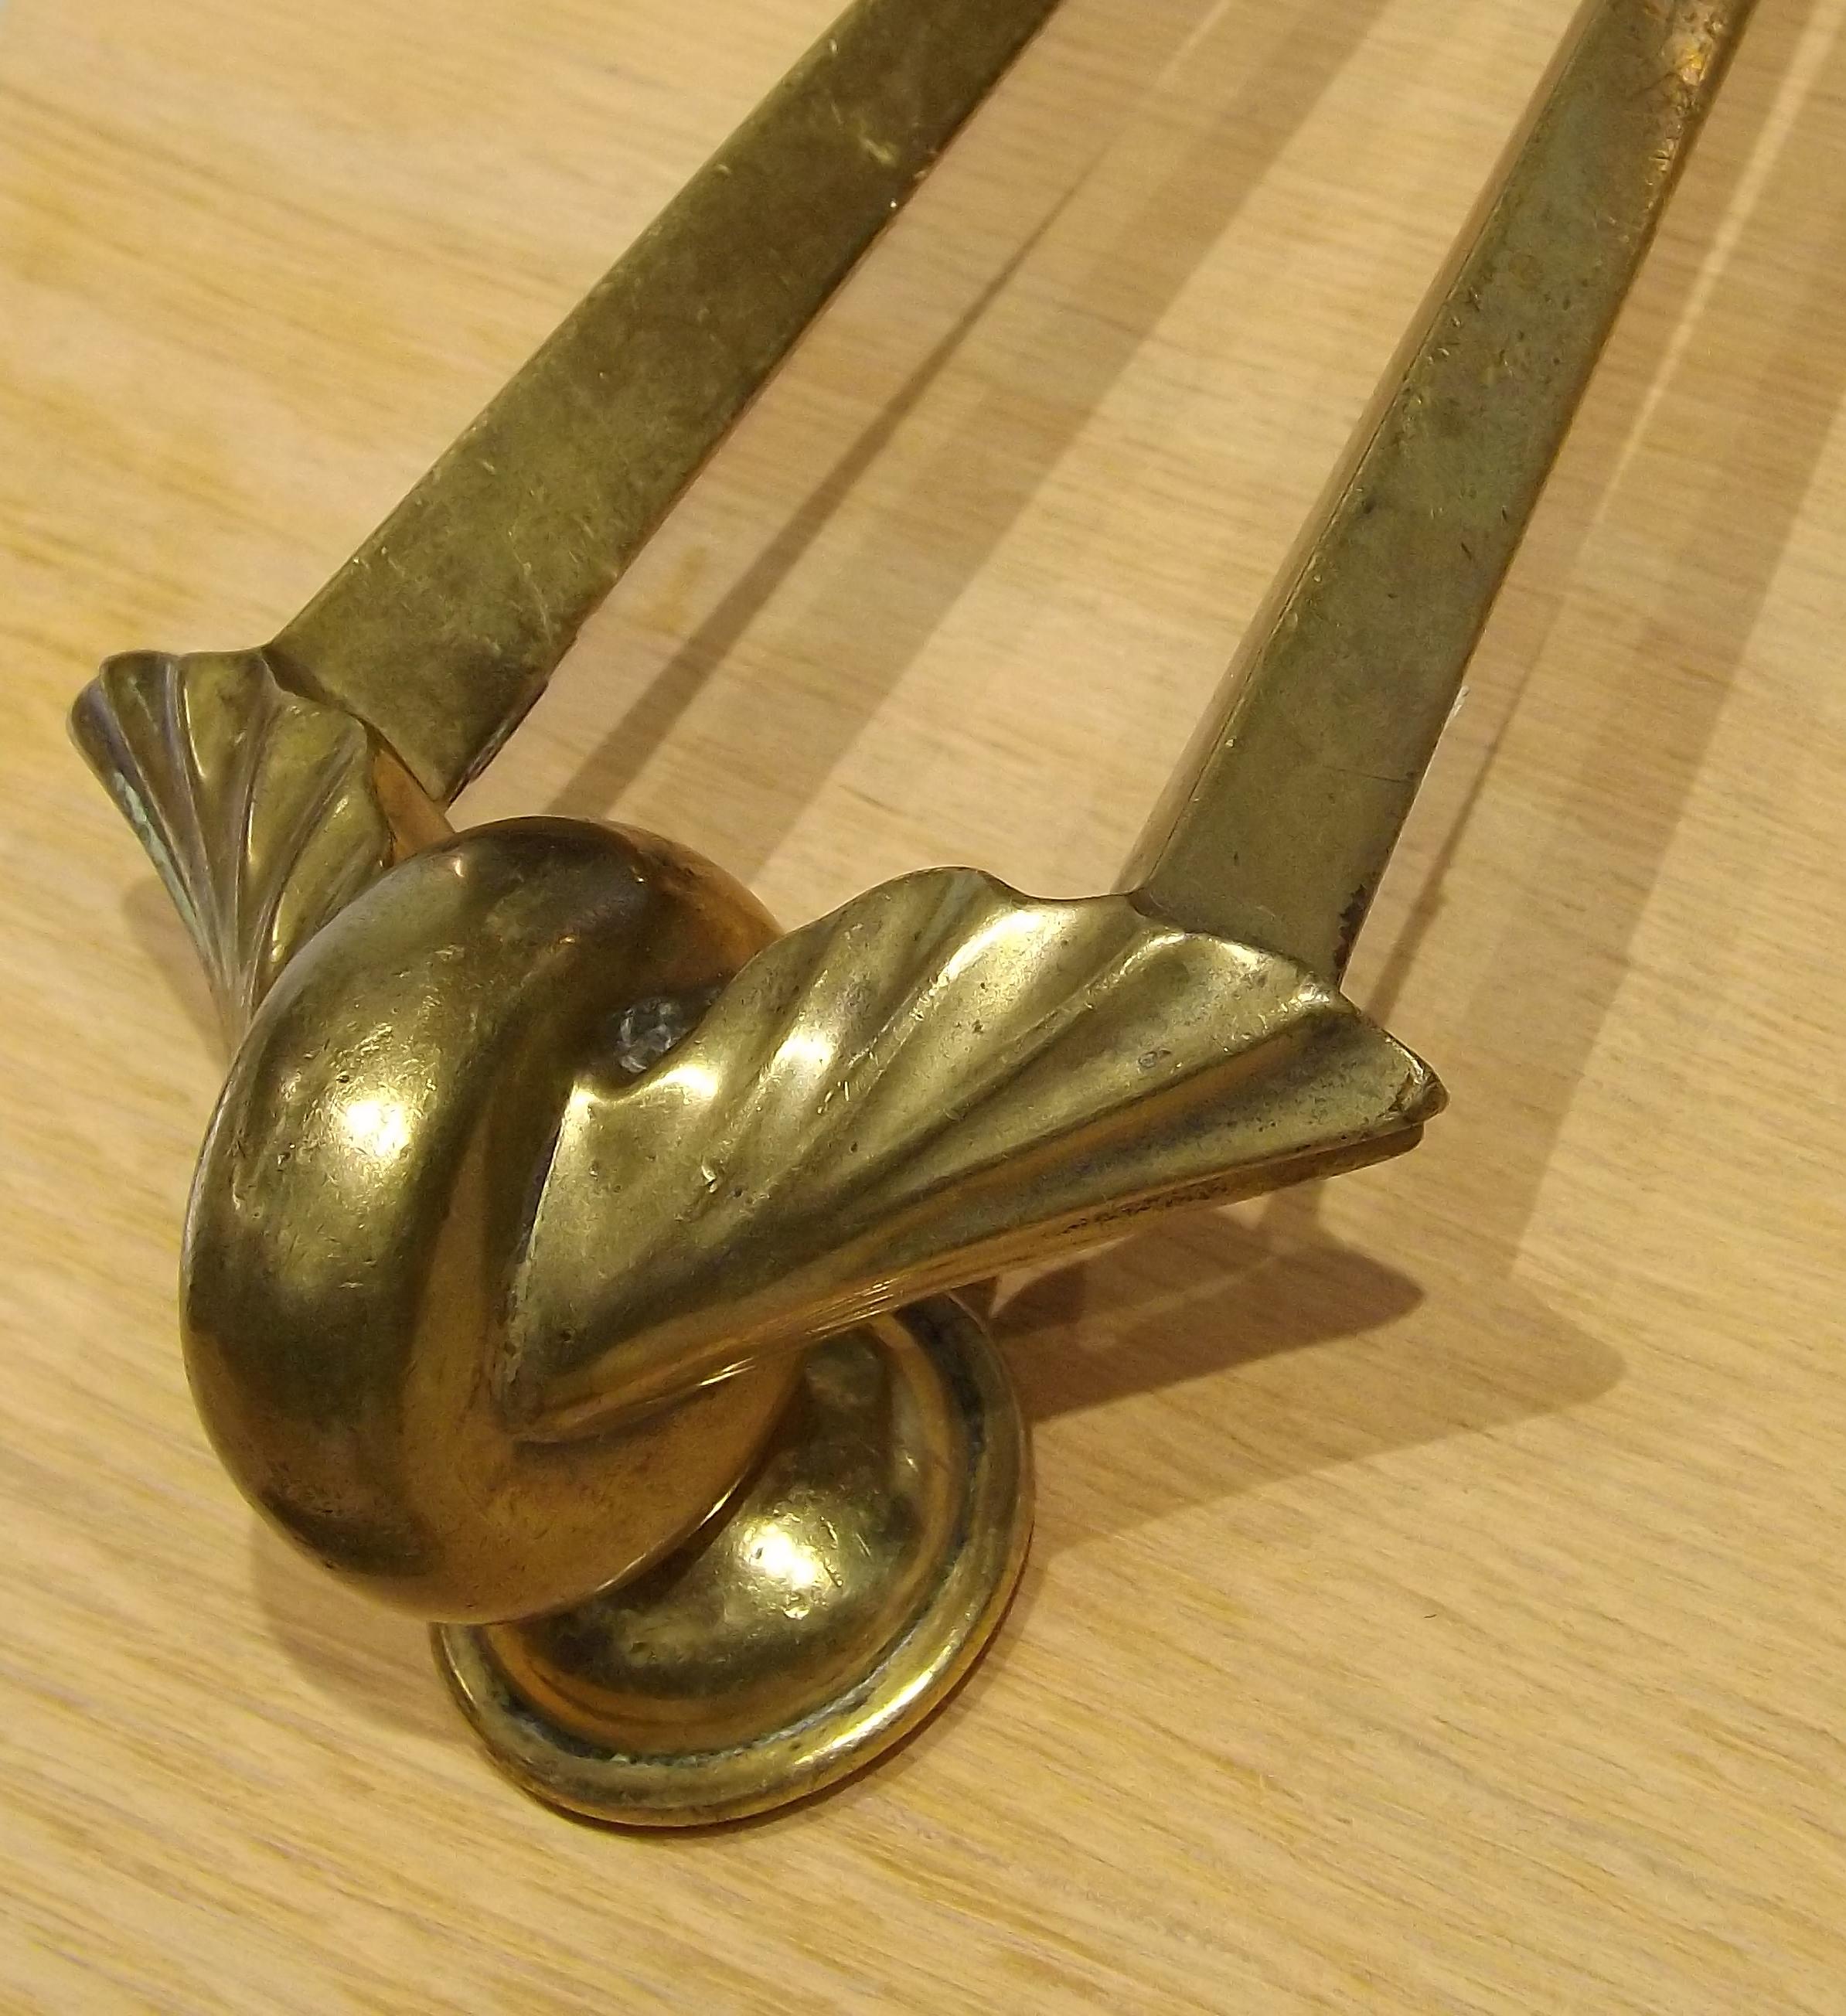 English Edwardian 'Winged Wheel' Door Knocker, circa 1900 In Good Condition For Sale In Charlevoix, MI